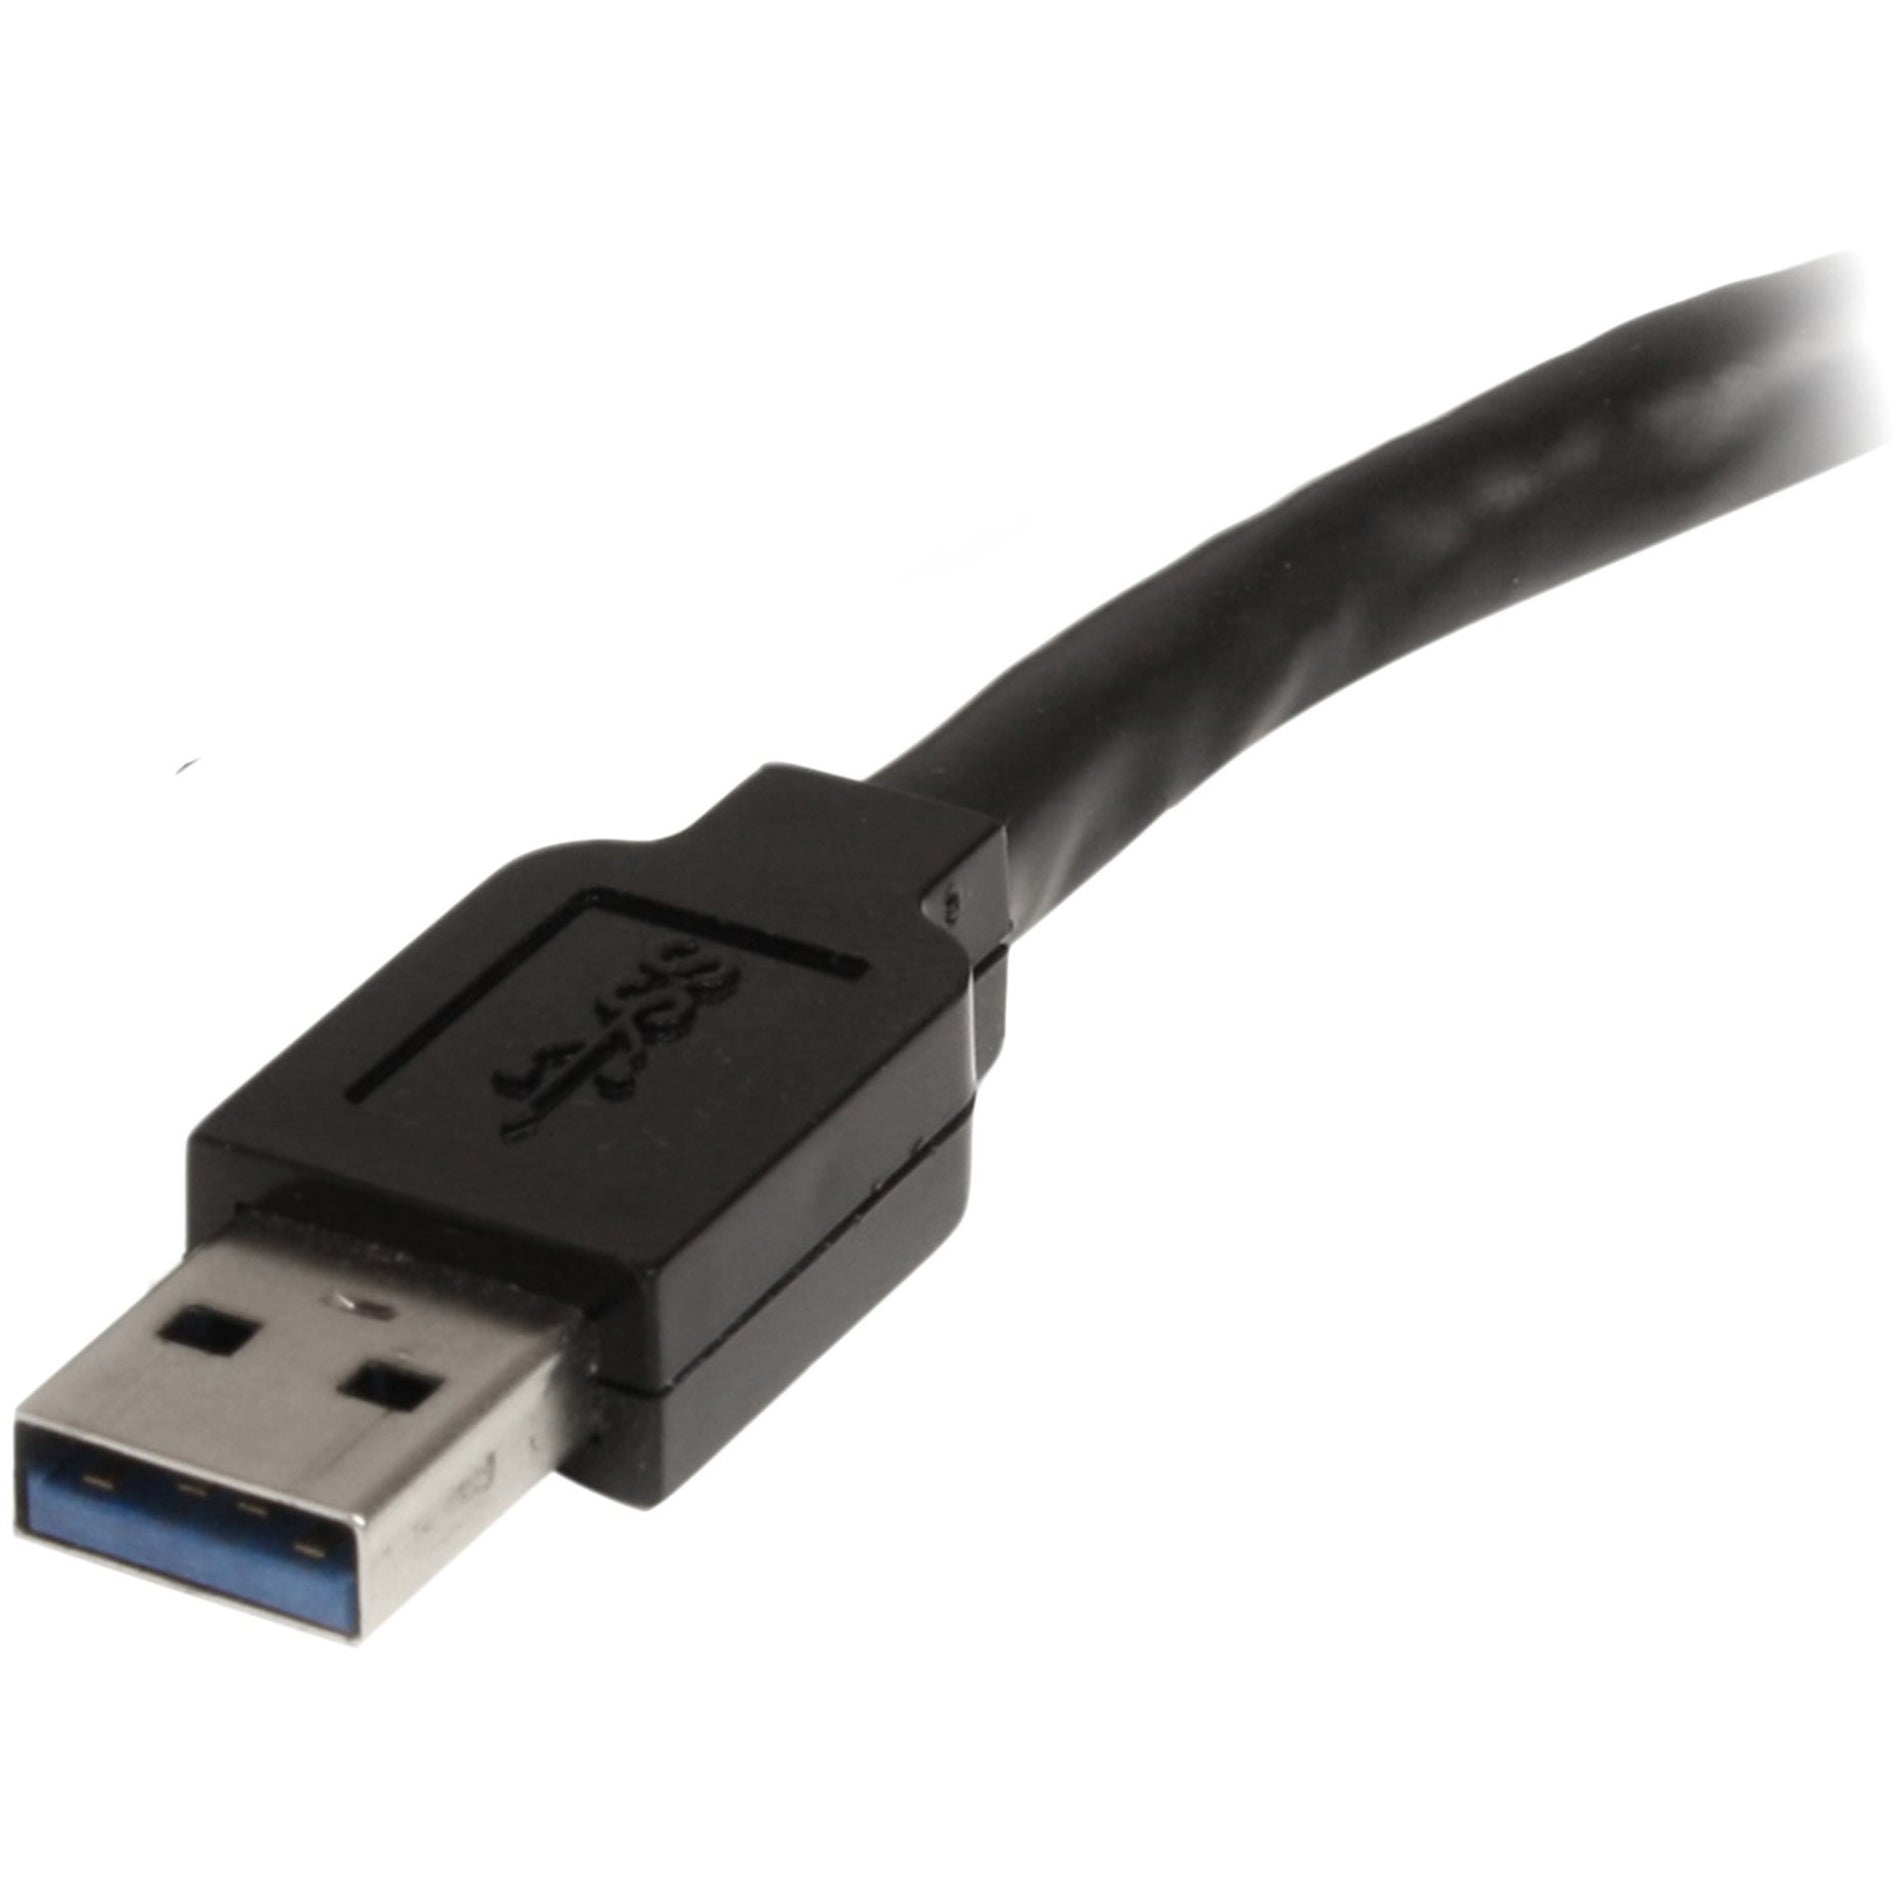 StarTech.com USB3AAEXT10M 10m USB 3.0 Active Extension Cable - M/F, Plug & Play, 5 Gbit/s Data Transfer Rate